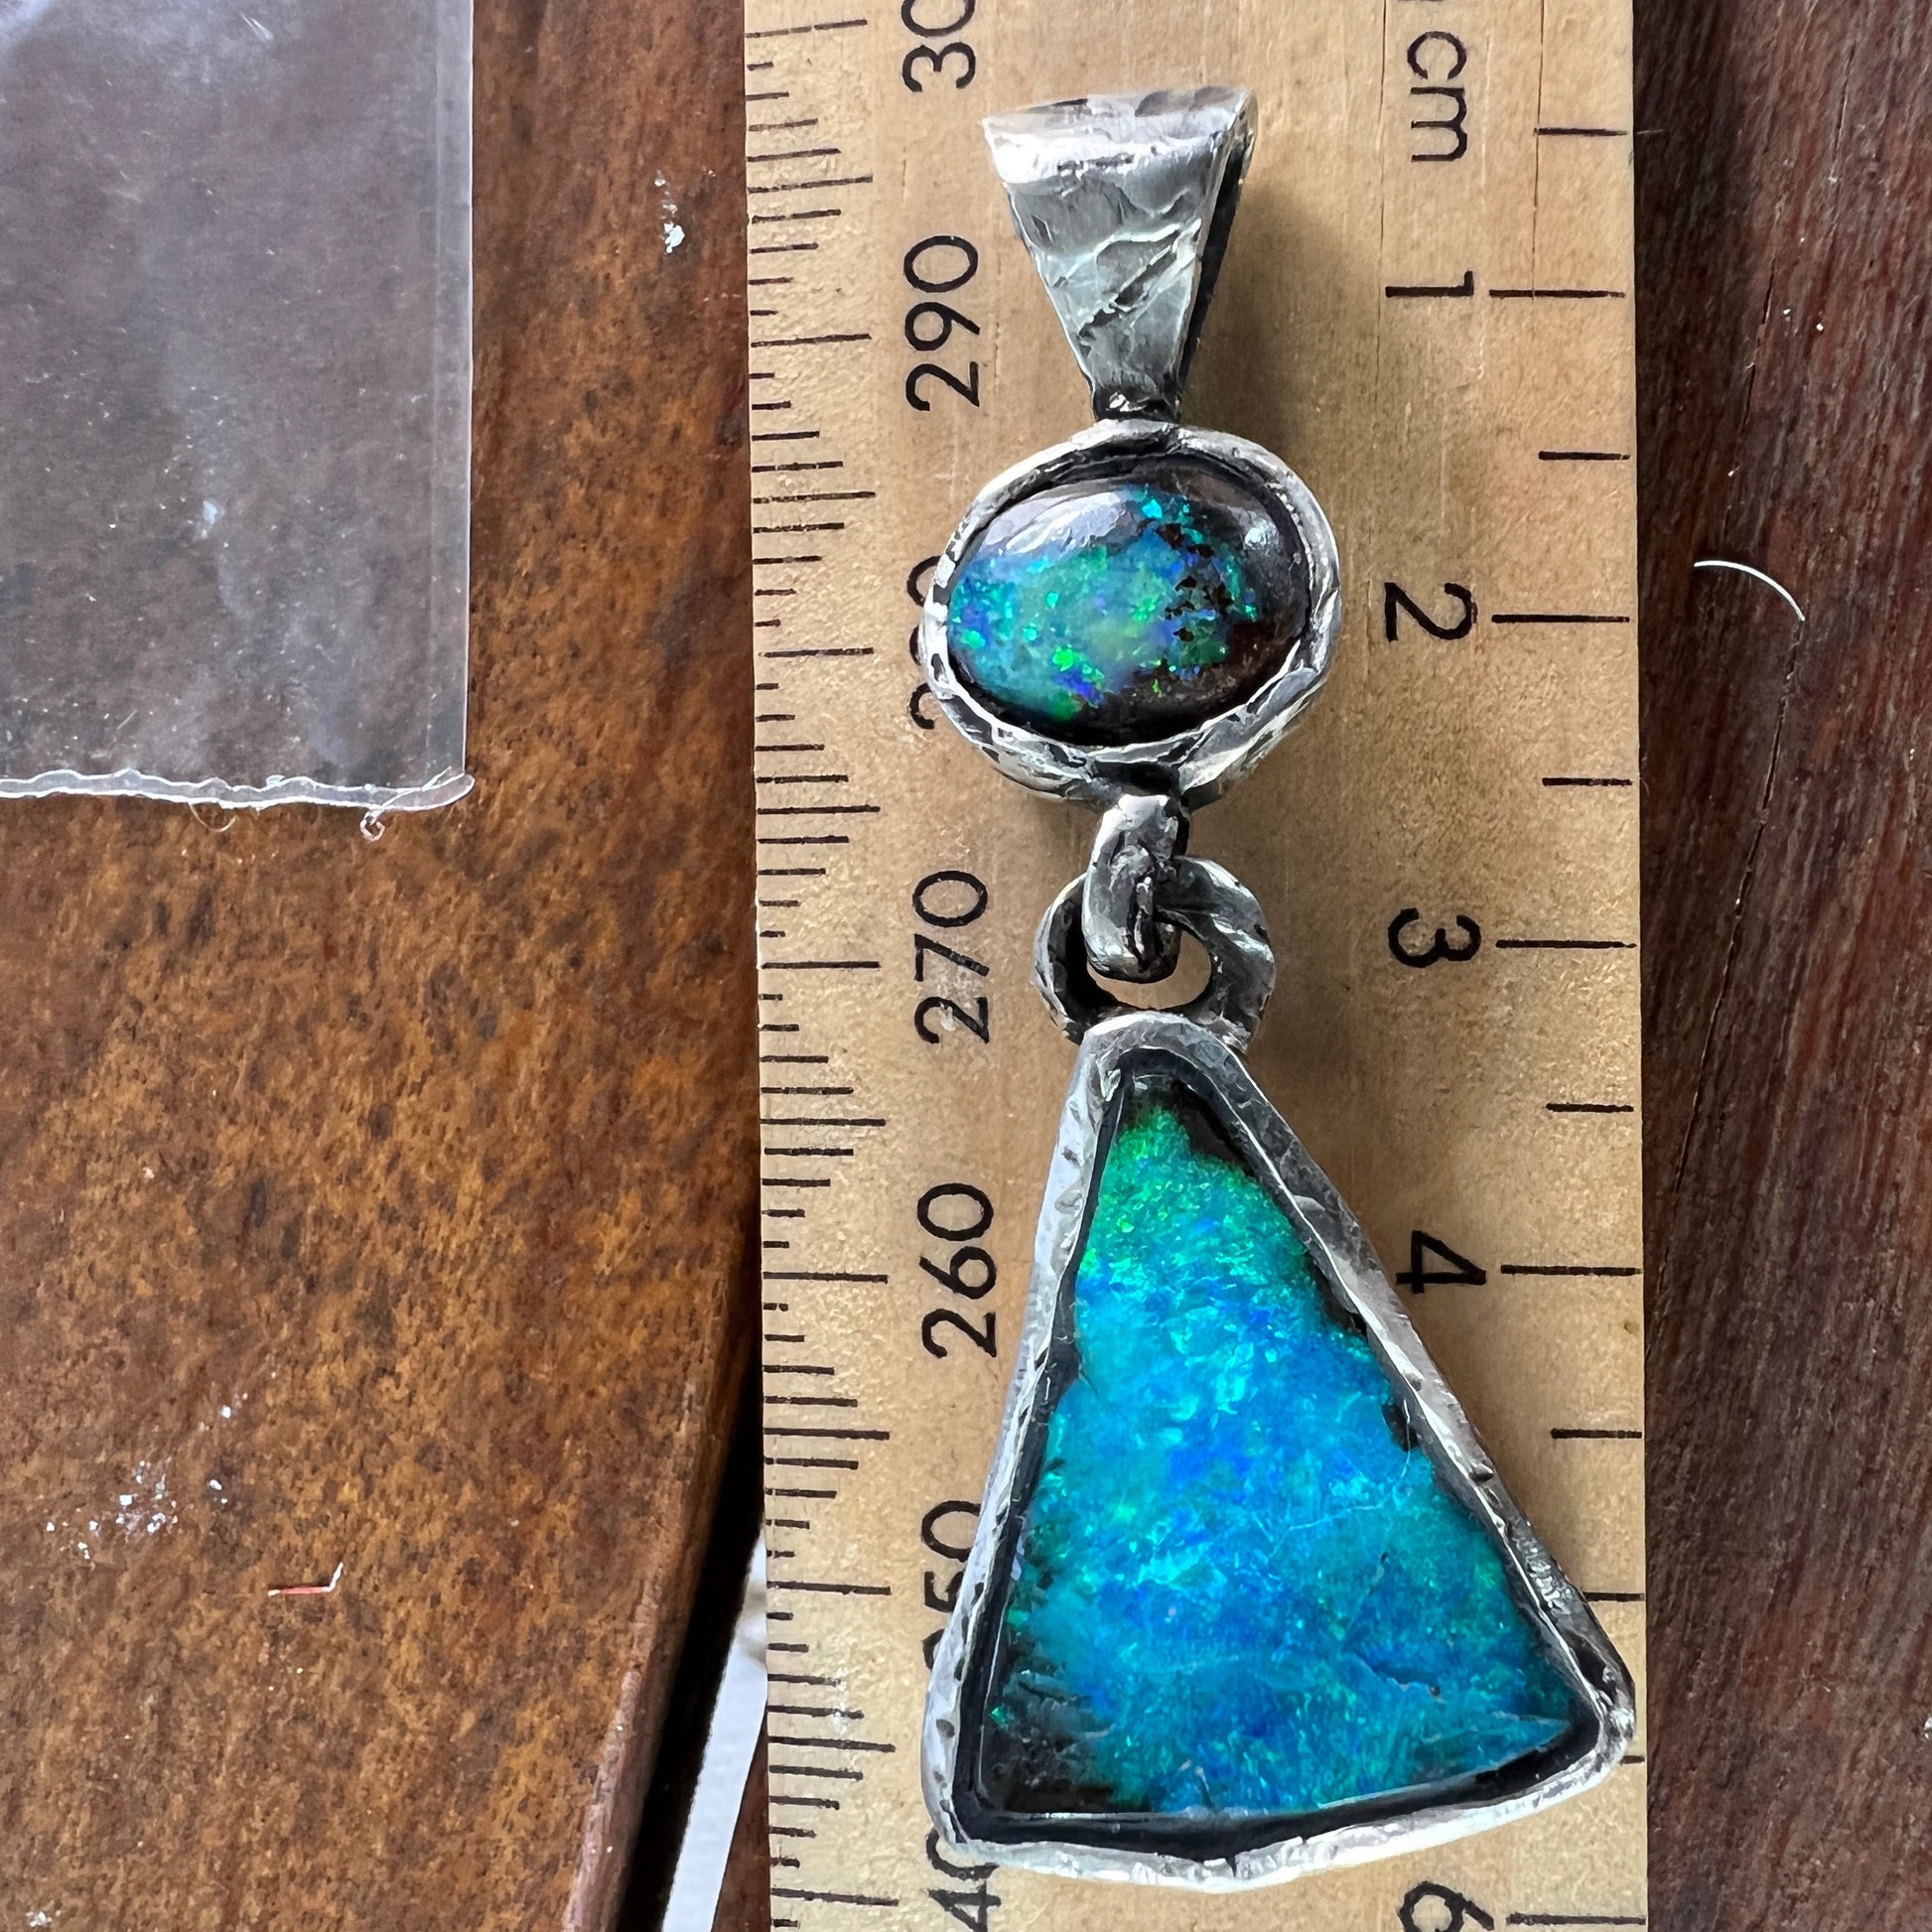 Stunning one-off hand made solid Boulder opal pendant. Hinged between stones to allow movement. Highly textured to enhance rawness.  Made with Argentium silver - a higher silver content using part recycled silver, and a lower allergenic. Crafted by Sally Fisher.